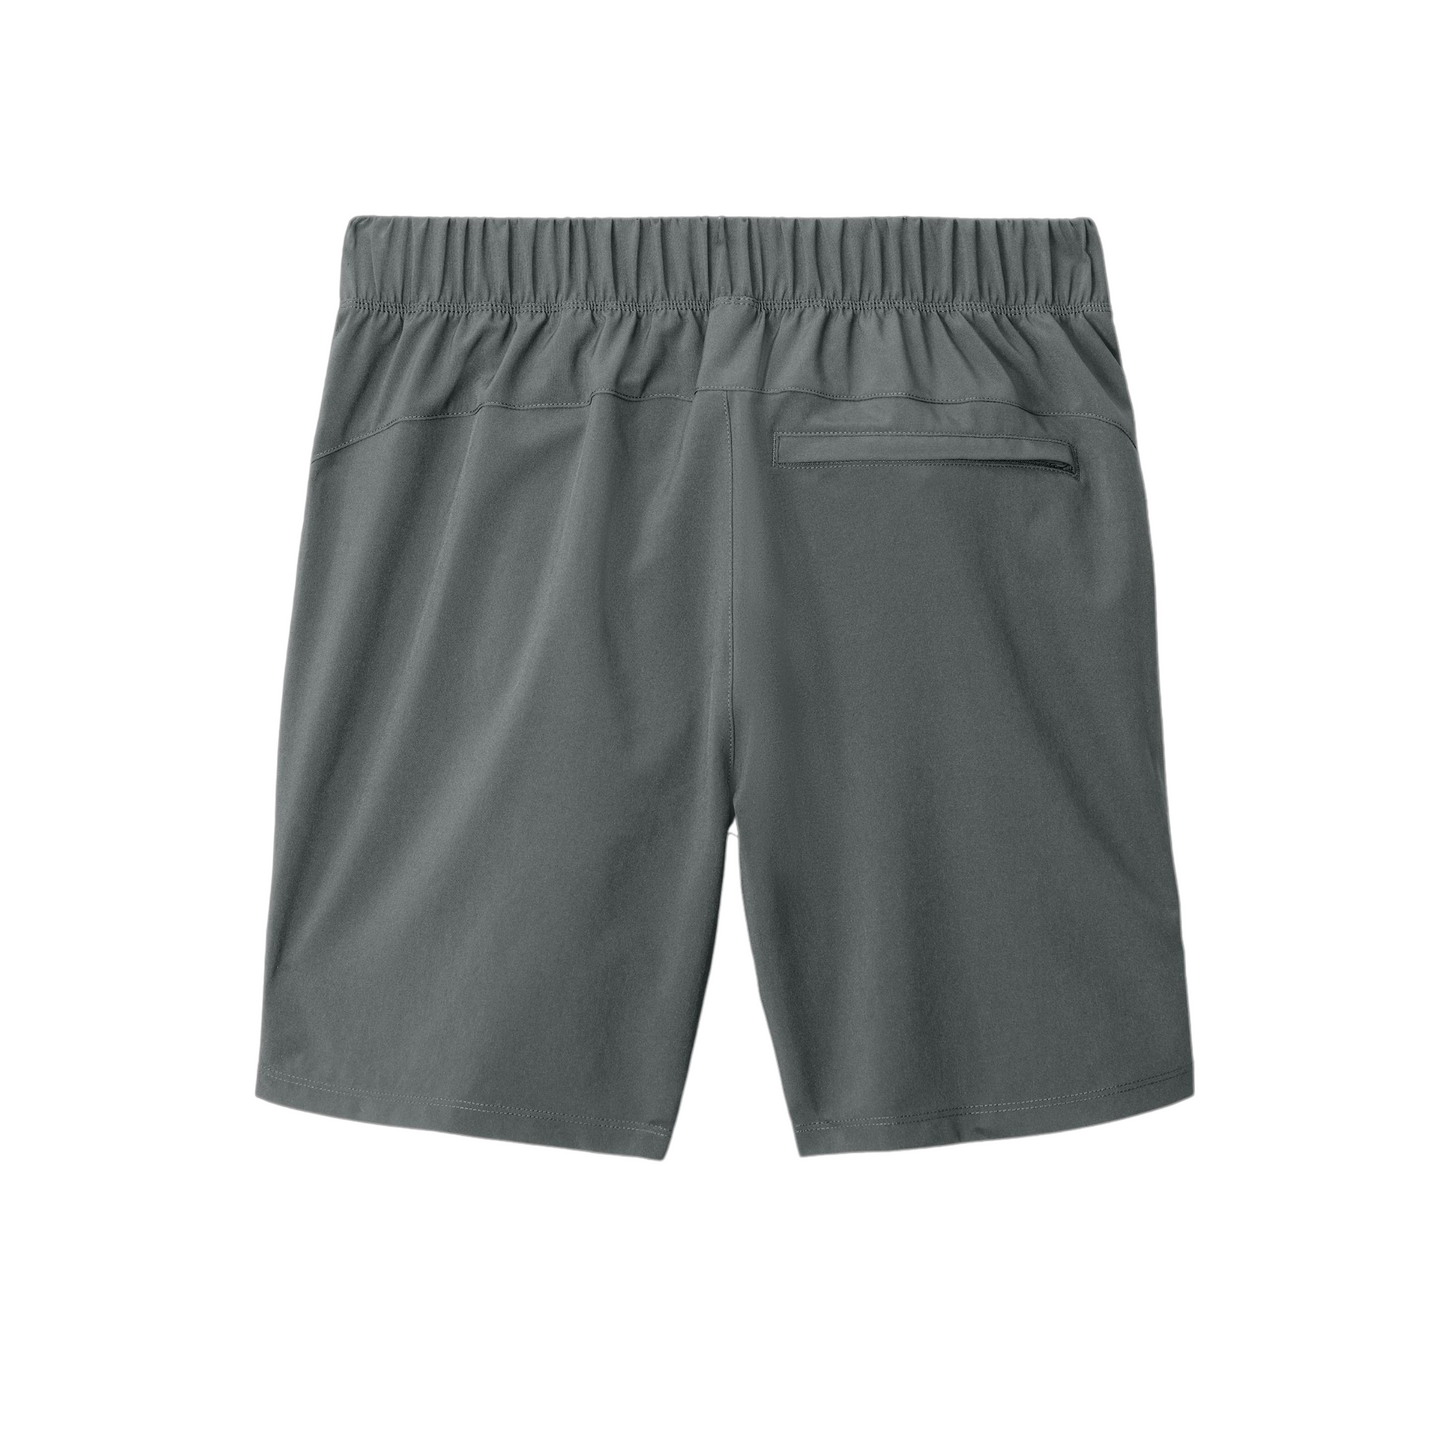 Onsted Wildcats 7" Inseam Shorts